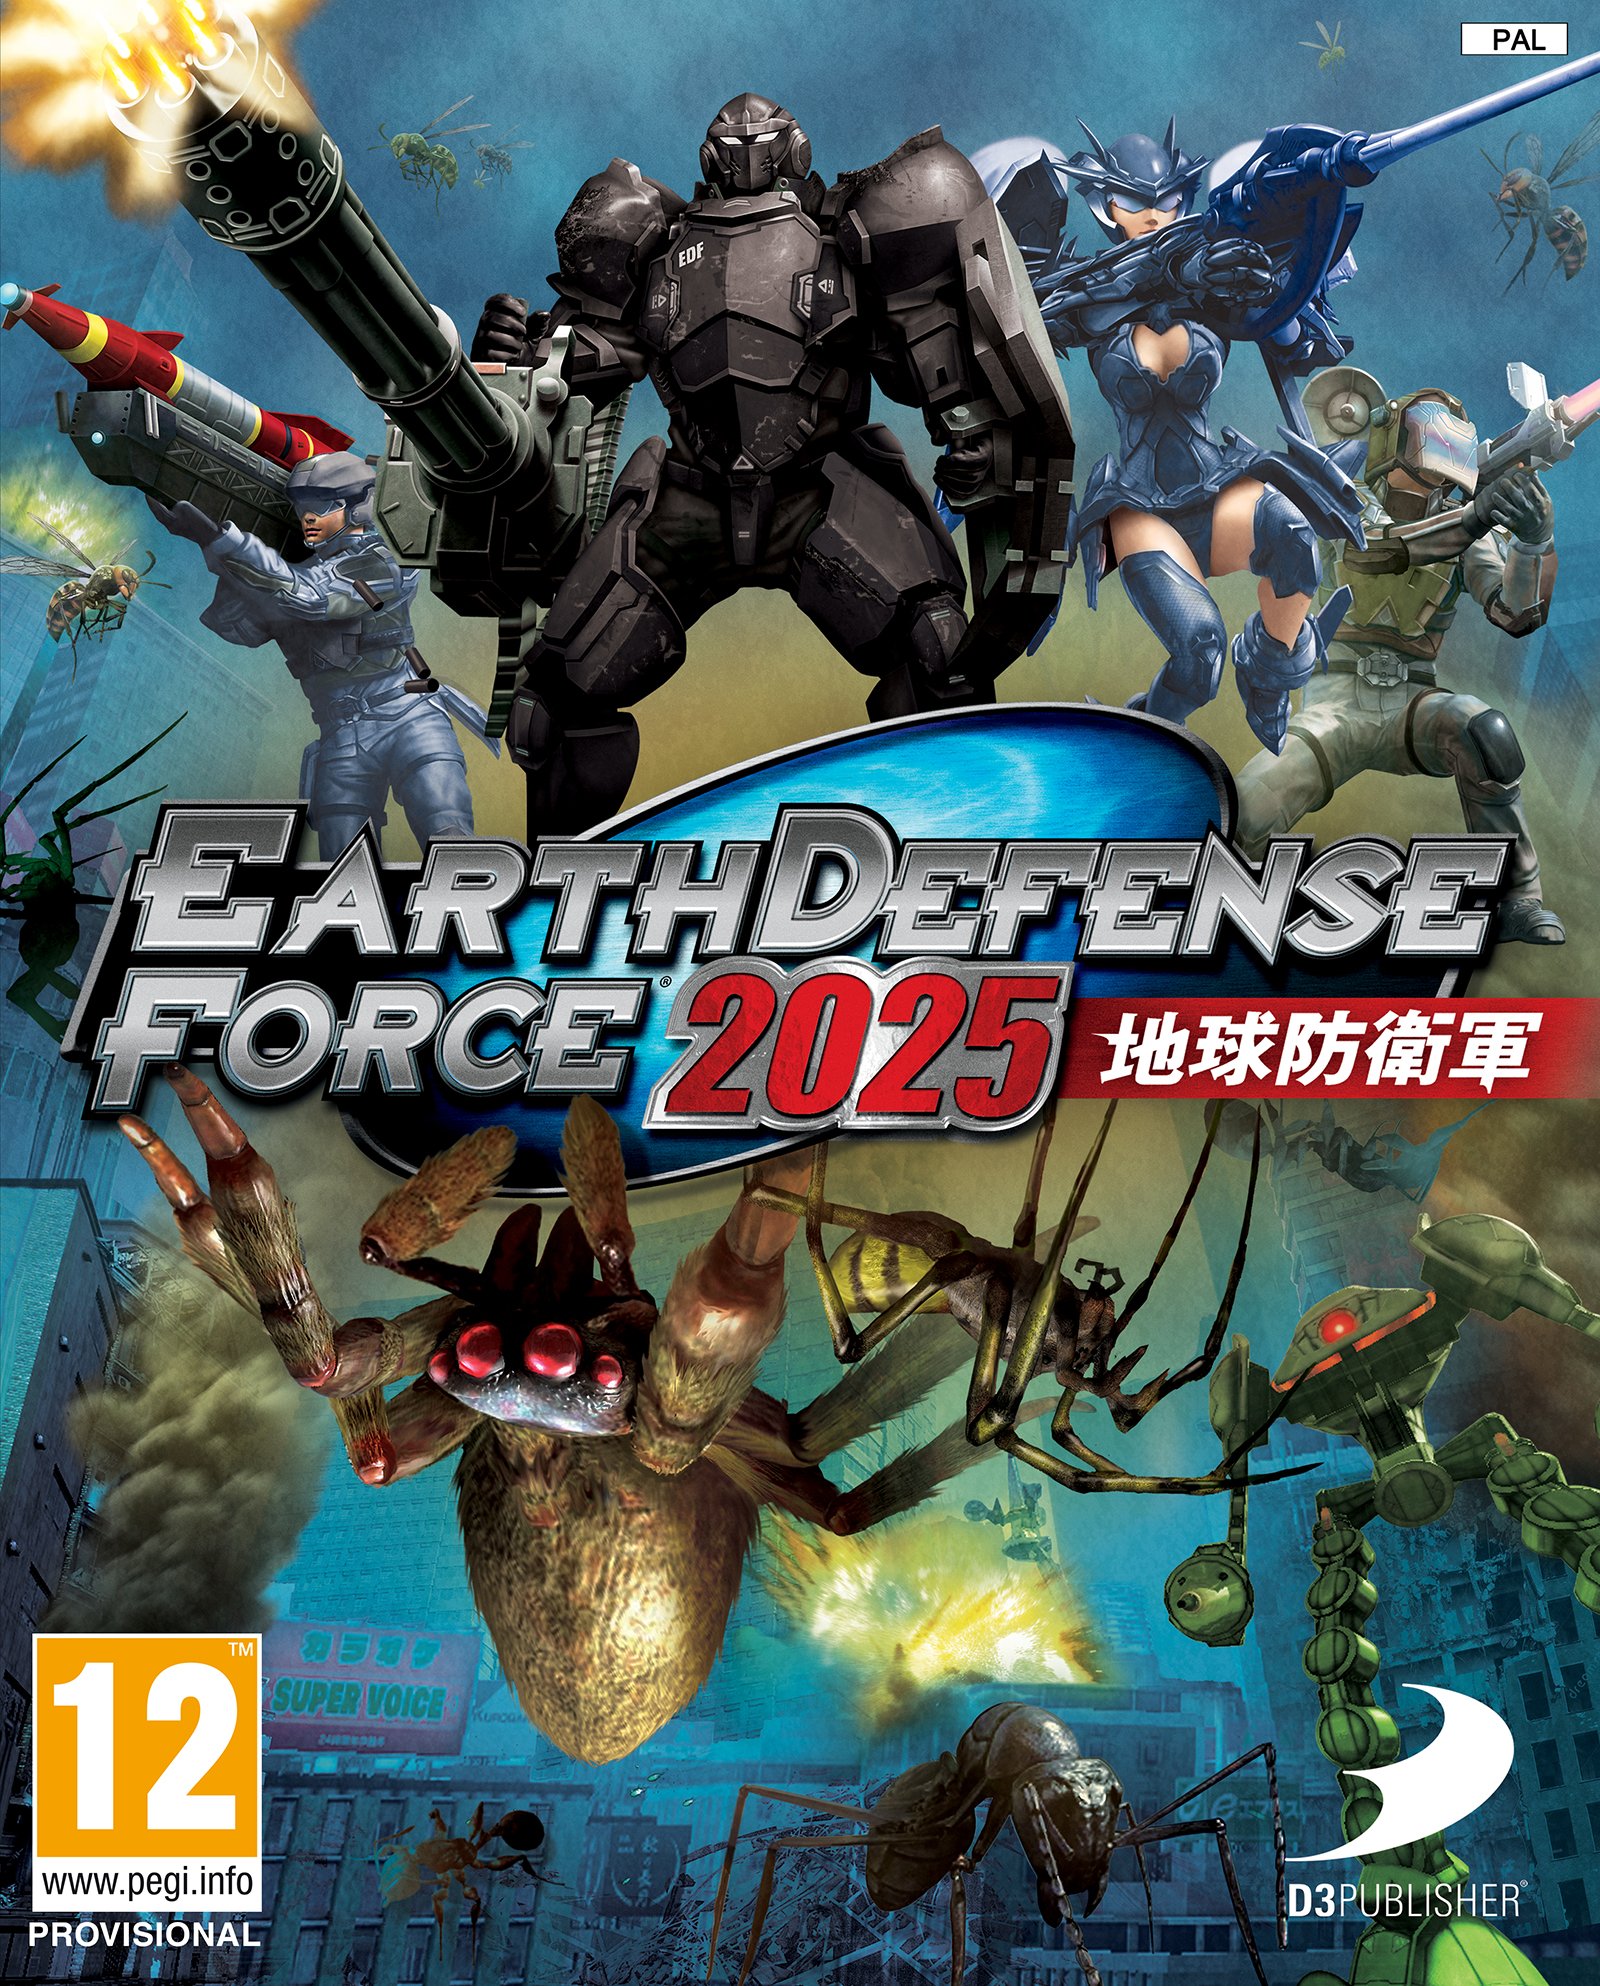 Image of Earth Defense Force 2025